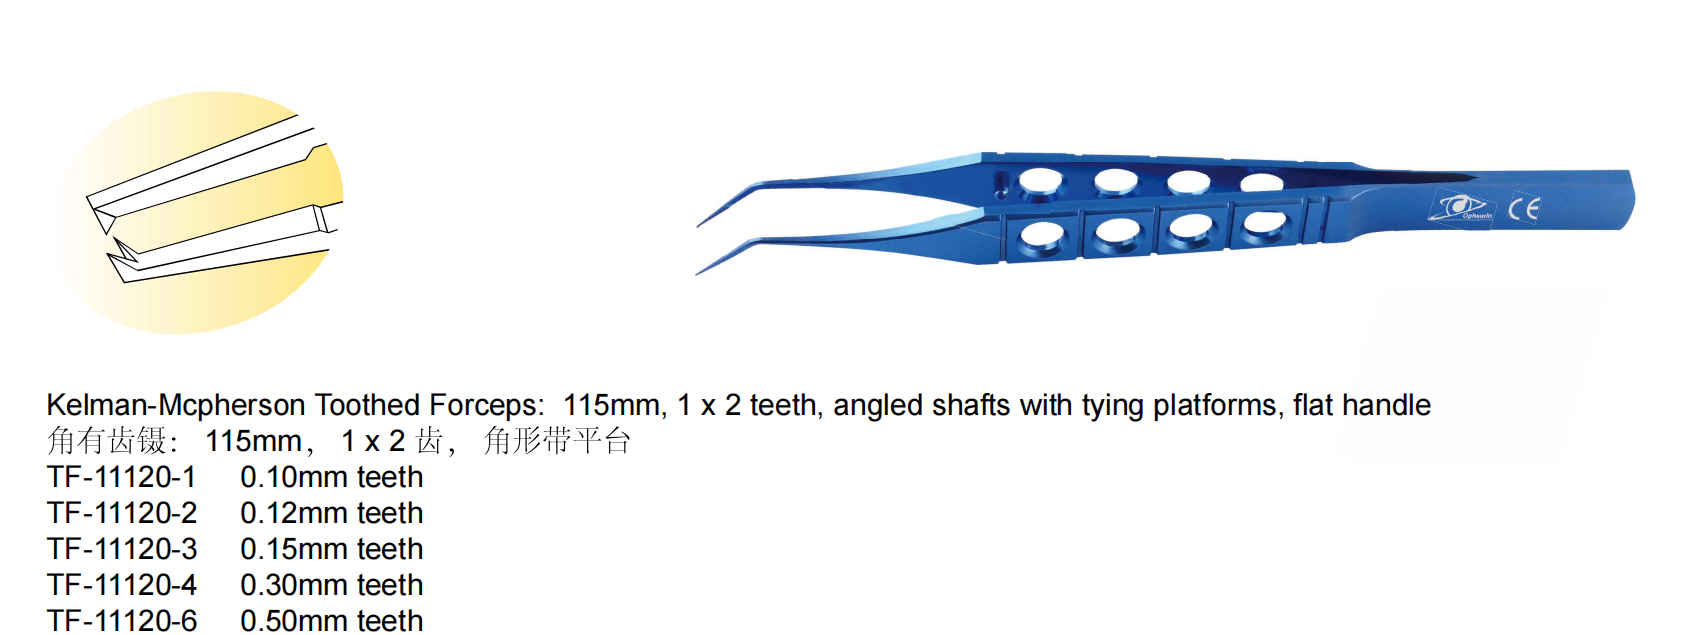 Mcpherson Toothed Forceps 115mm